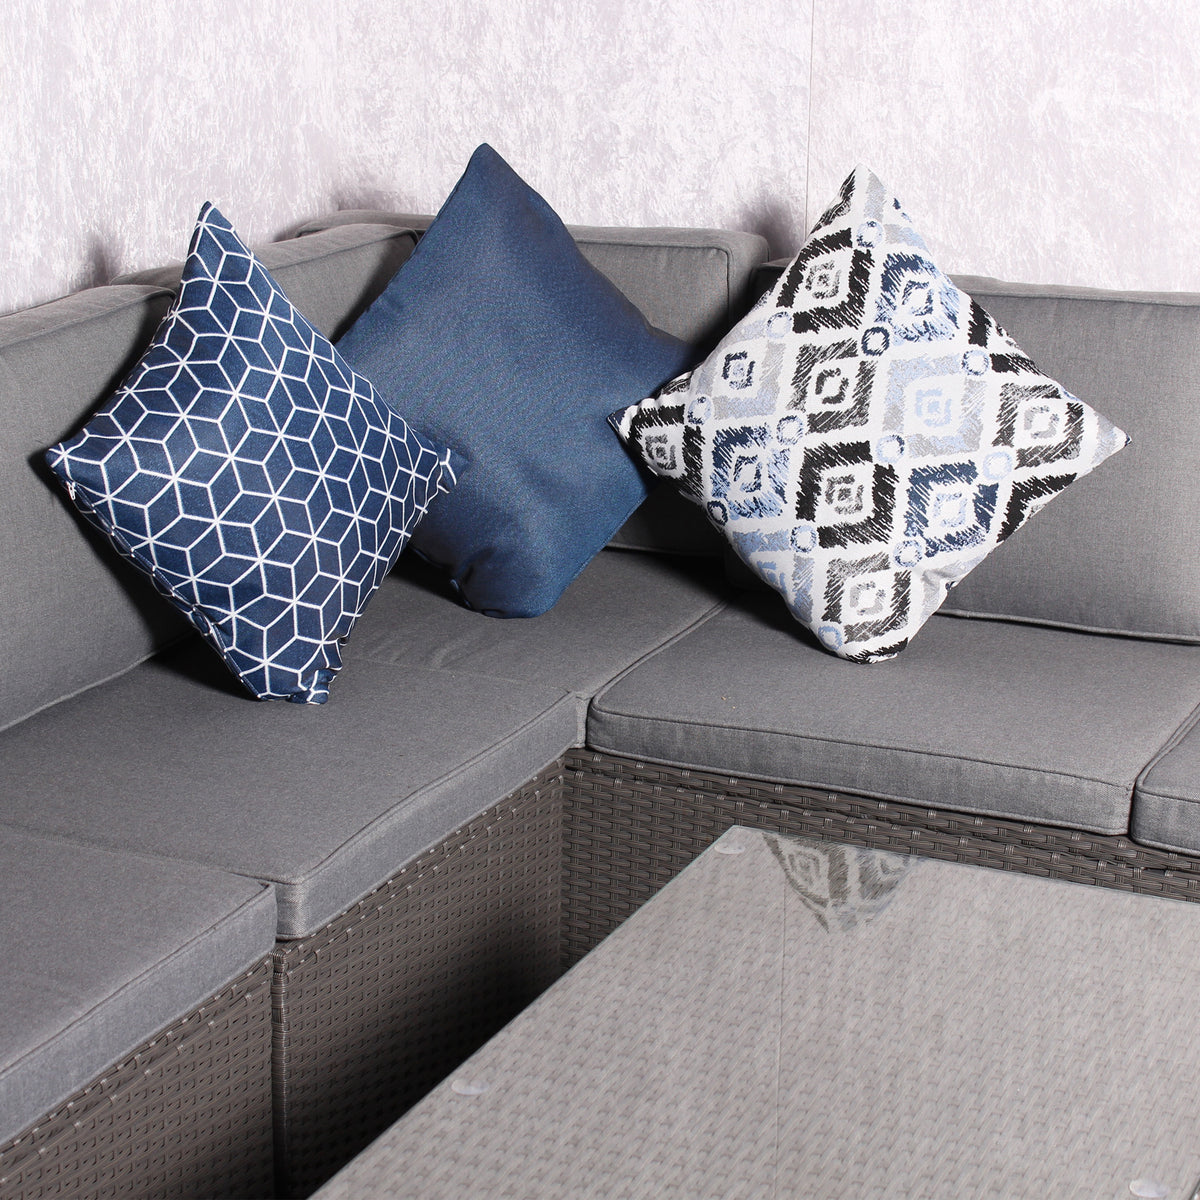 Outdoor Blue Plain Scatter Cushion